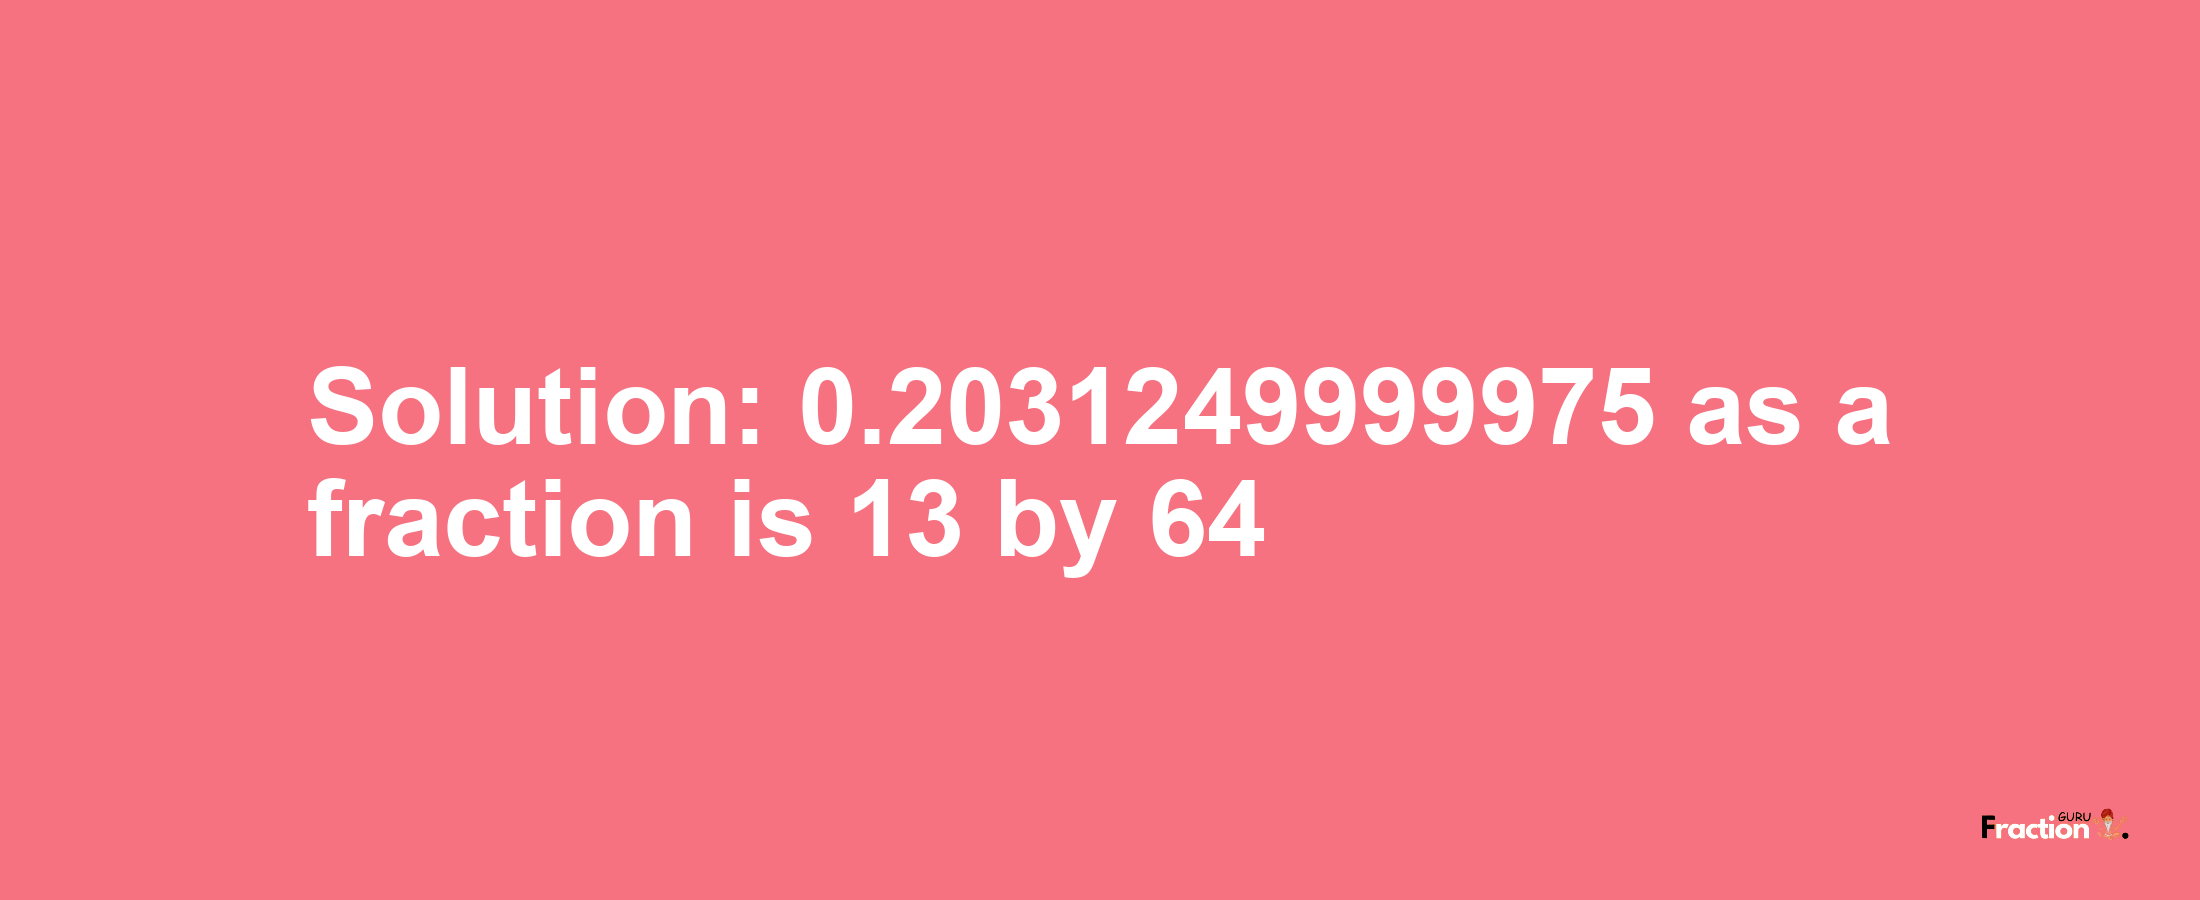 Solution:0.2031249999975 as a fraction is 13/64